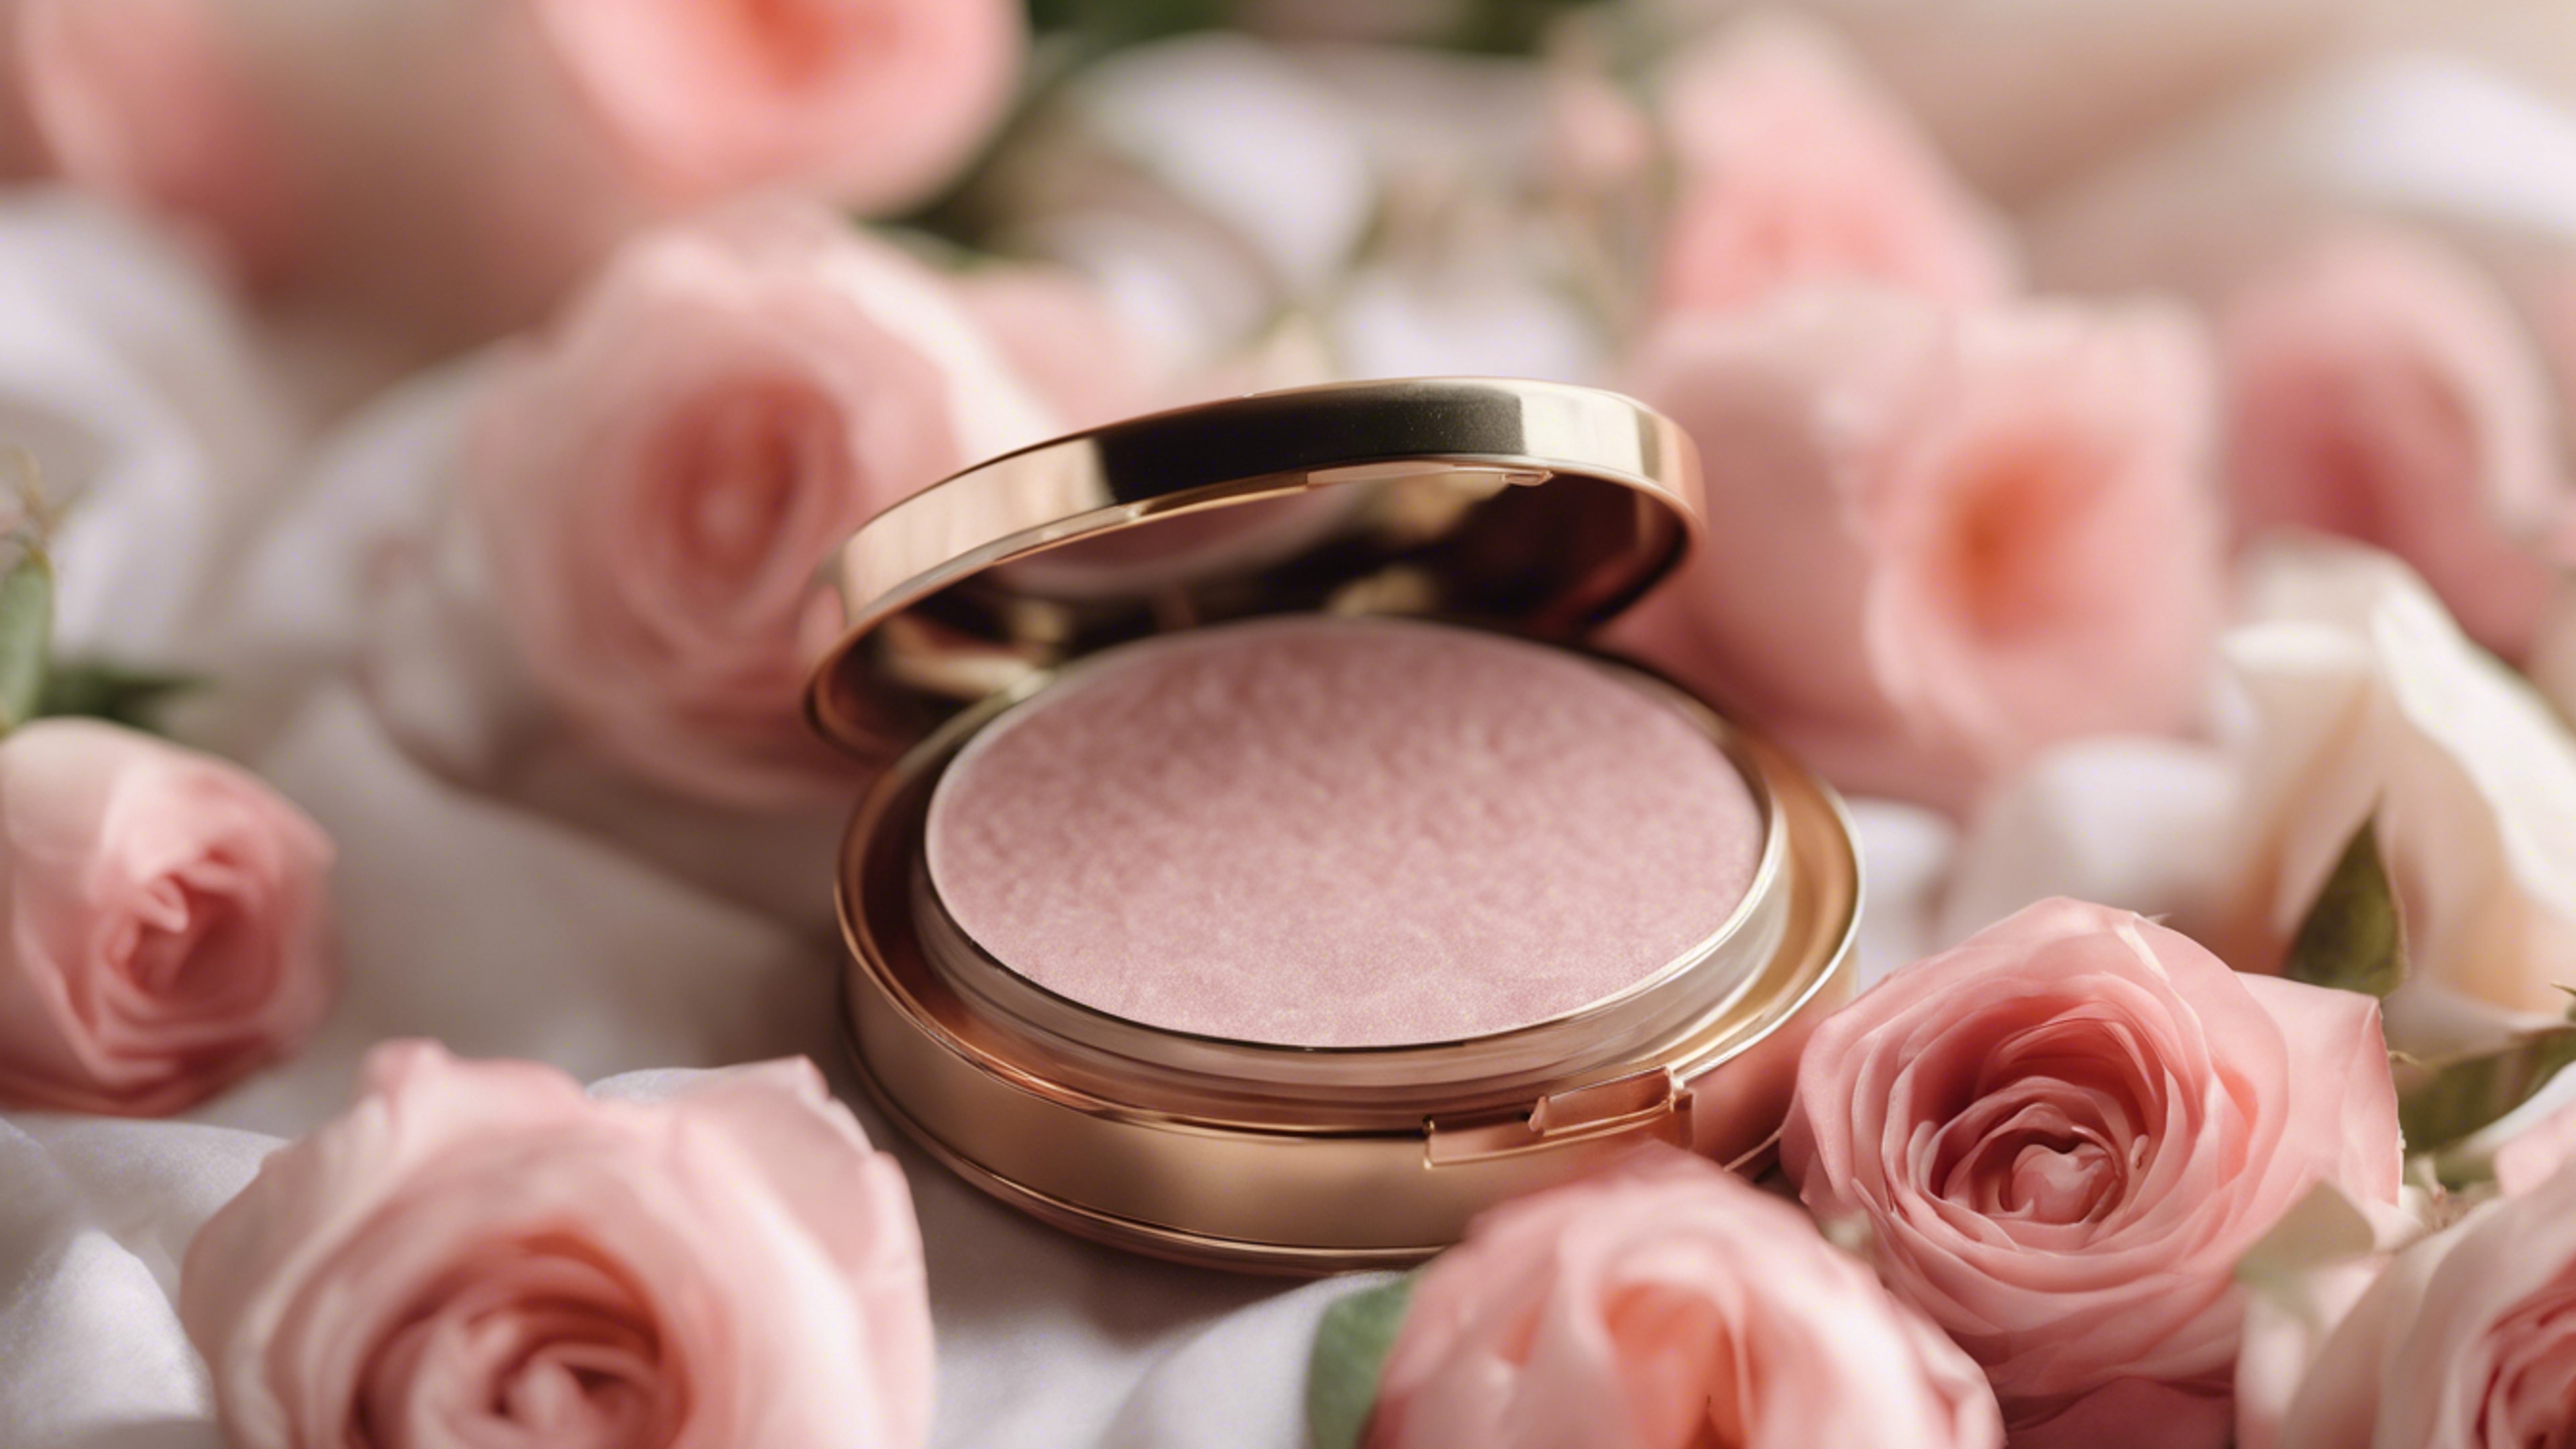 A compact case of blush sitting delicately on a bed of roses. Fondo de pantalla[1073b1bff2a446eda093]